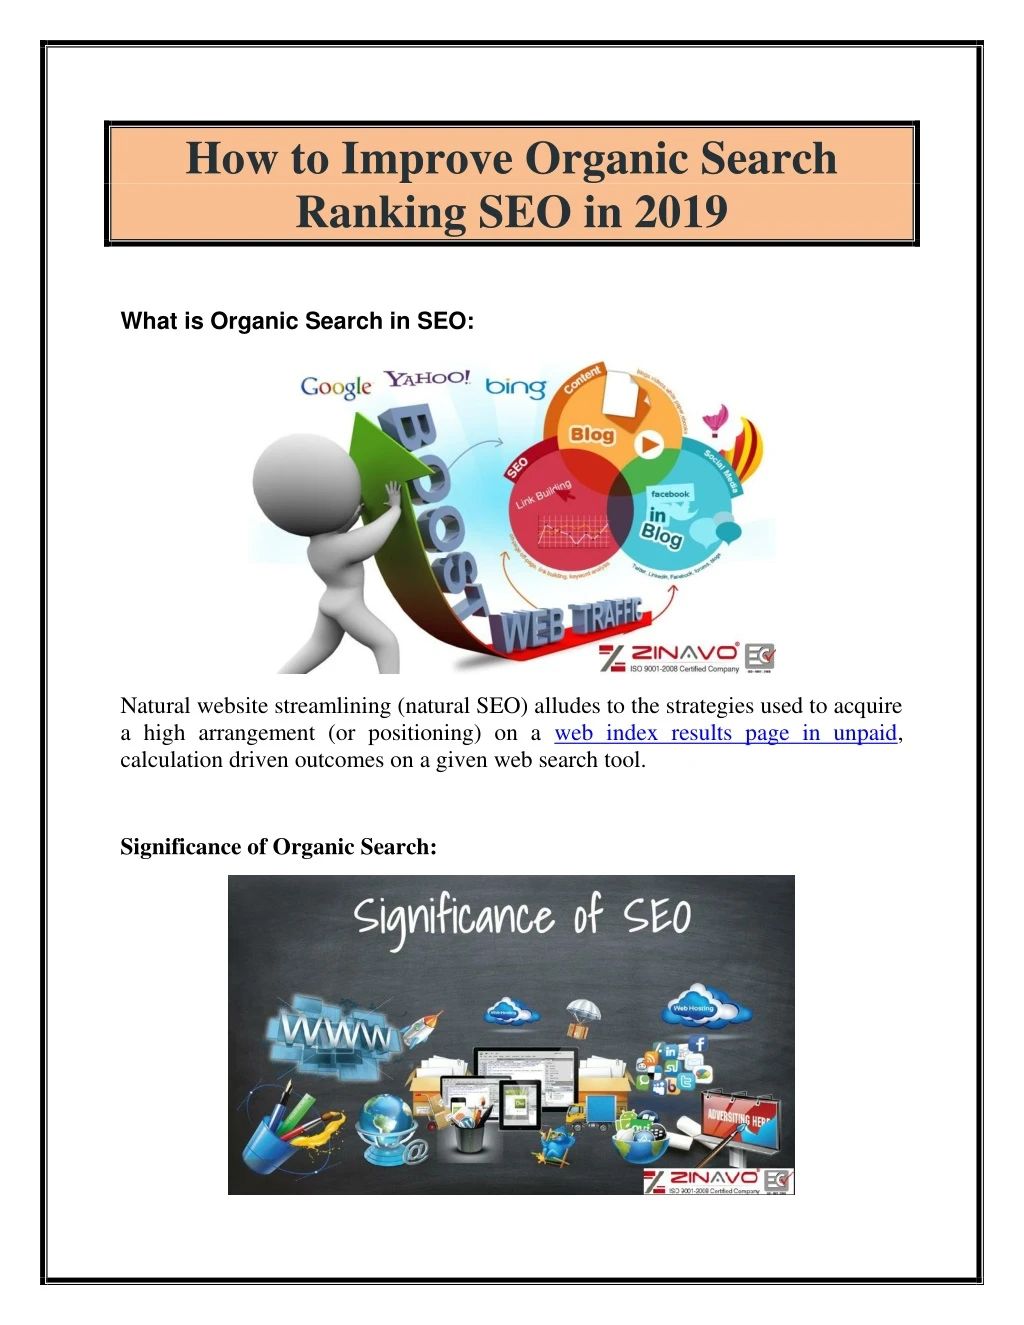 how to improve organic search ranking seo in 2019